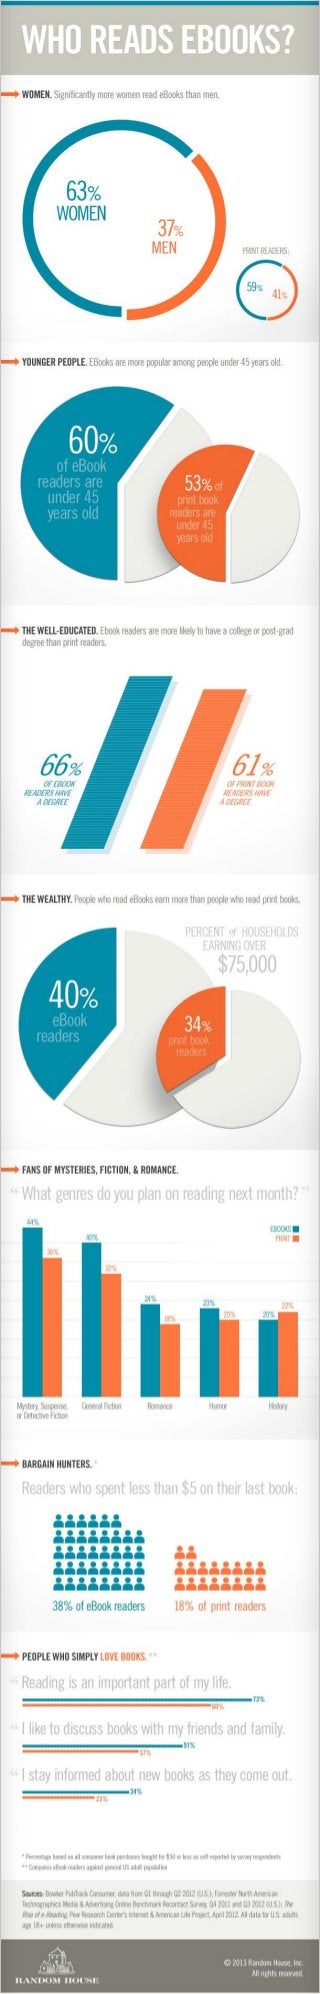 Who Reads eBooks? [Infographic]